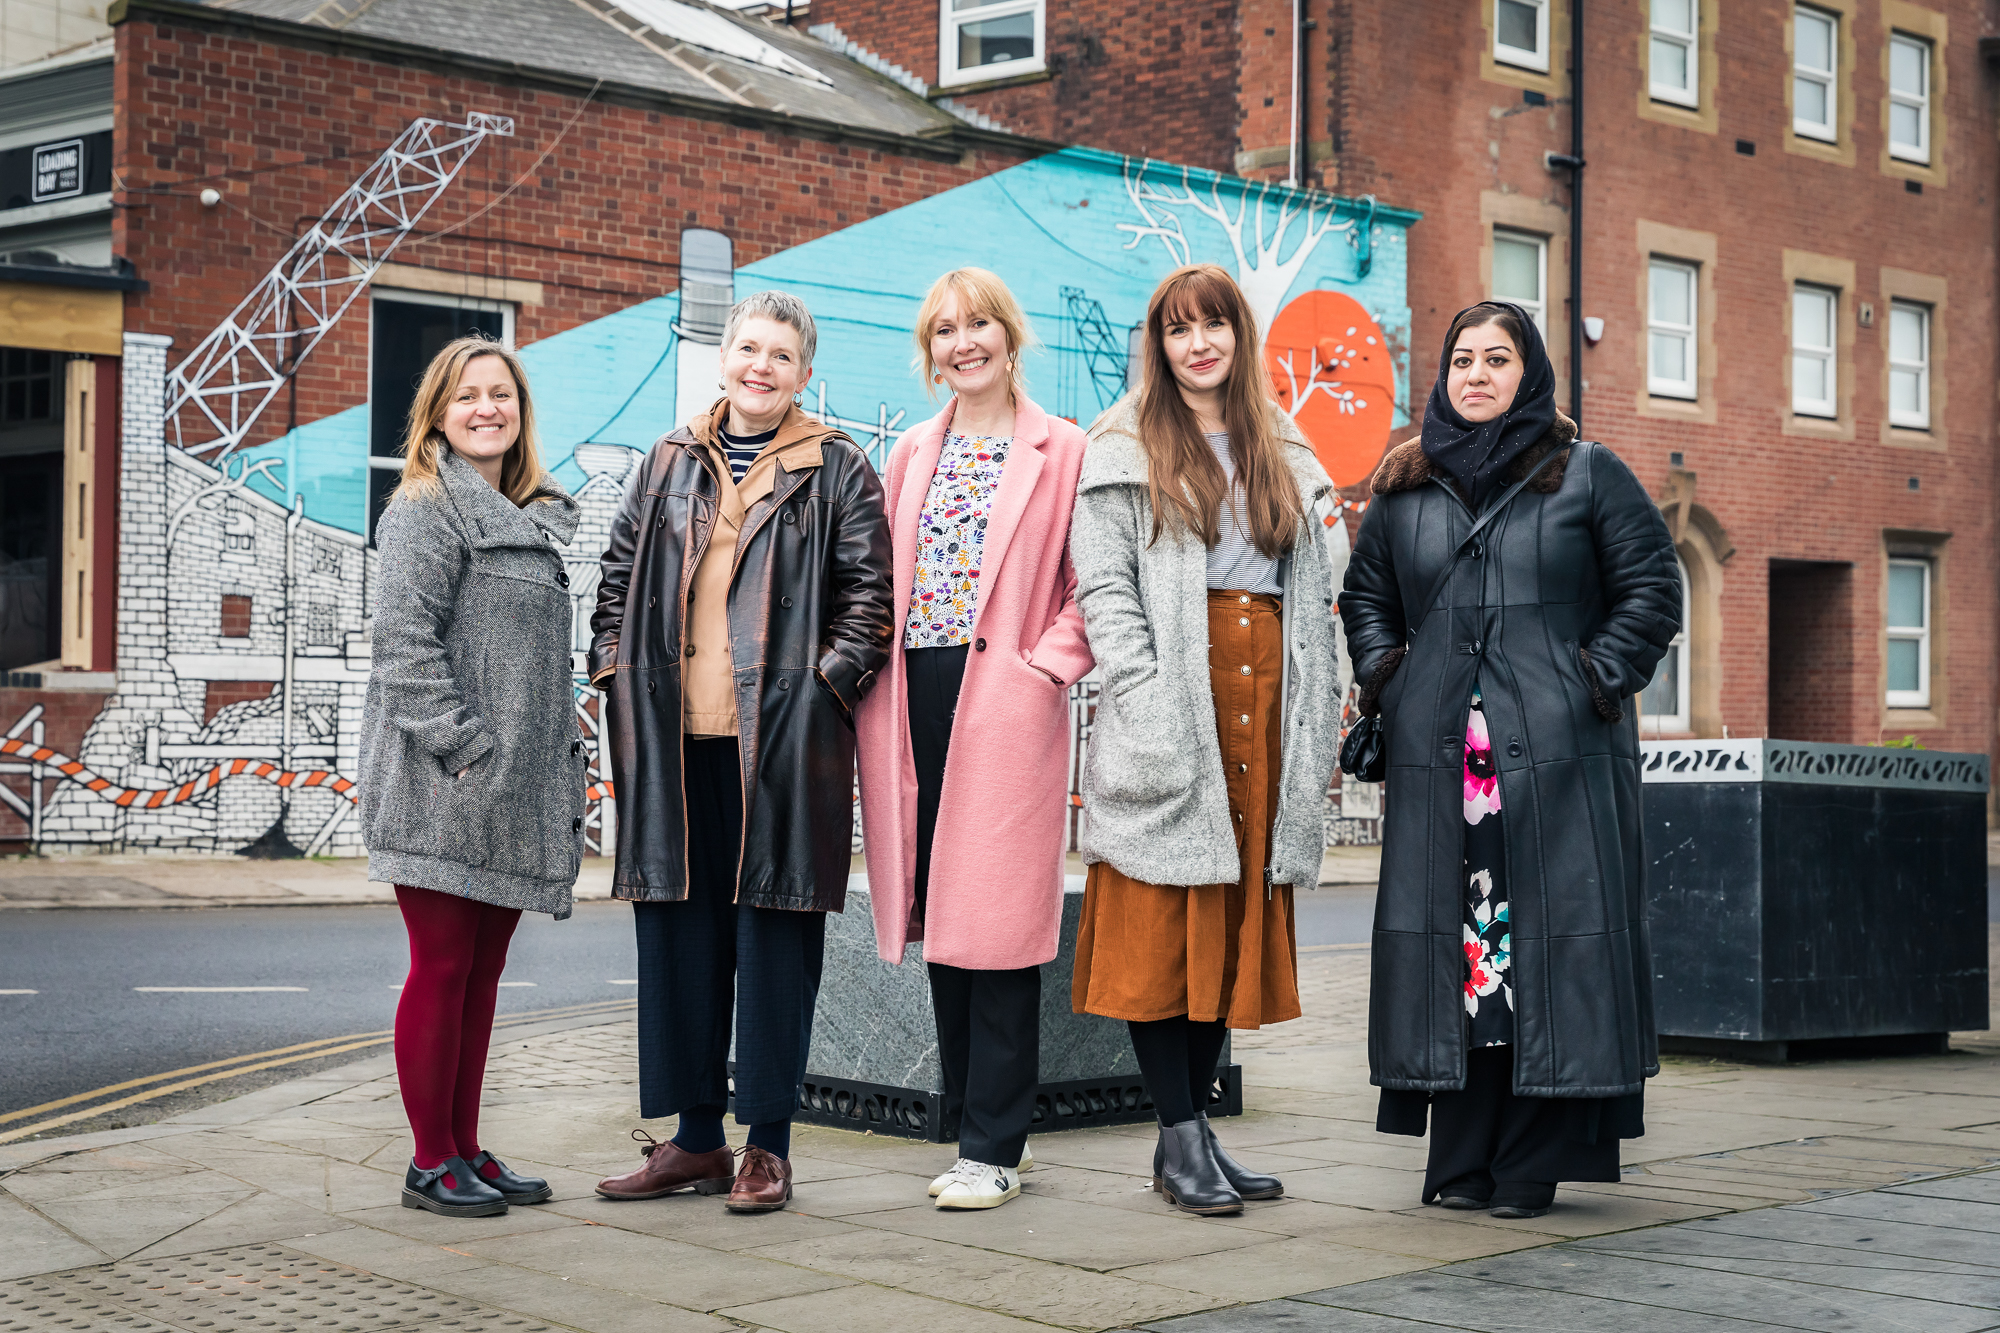 Five artists take up residence in Rotherham